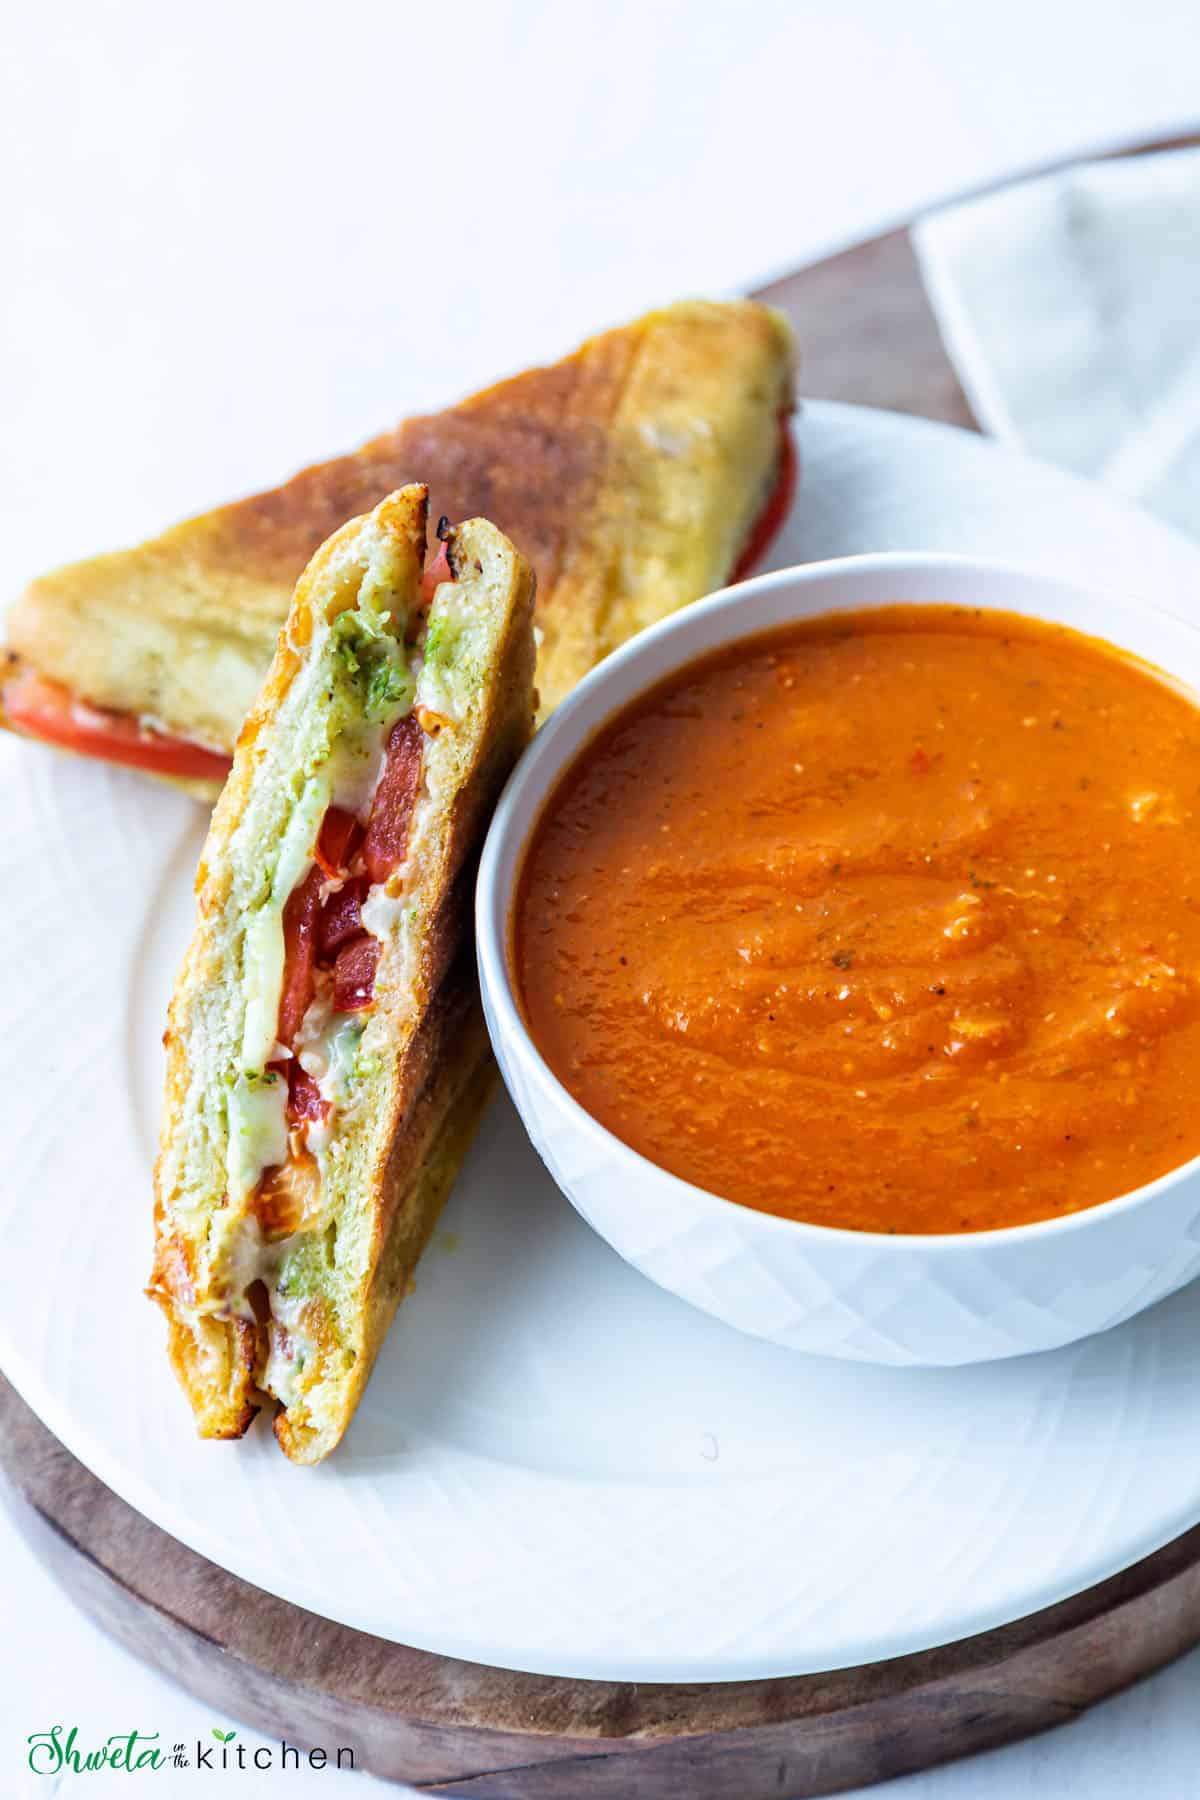 Tomato basil soup in a bowl with grilled cheese sandwich on side on a plate